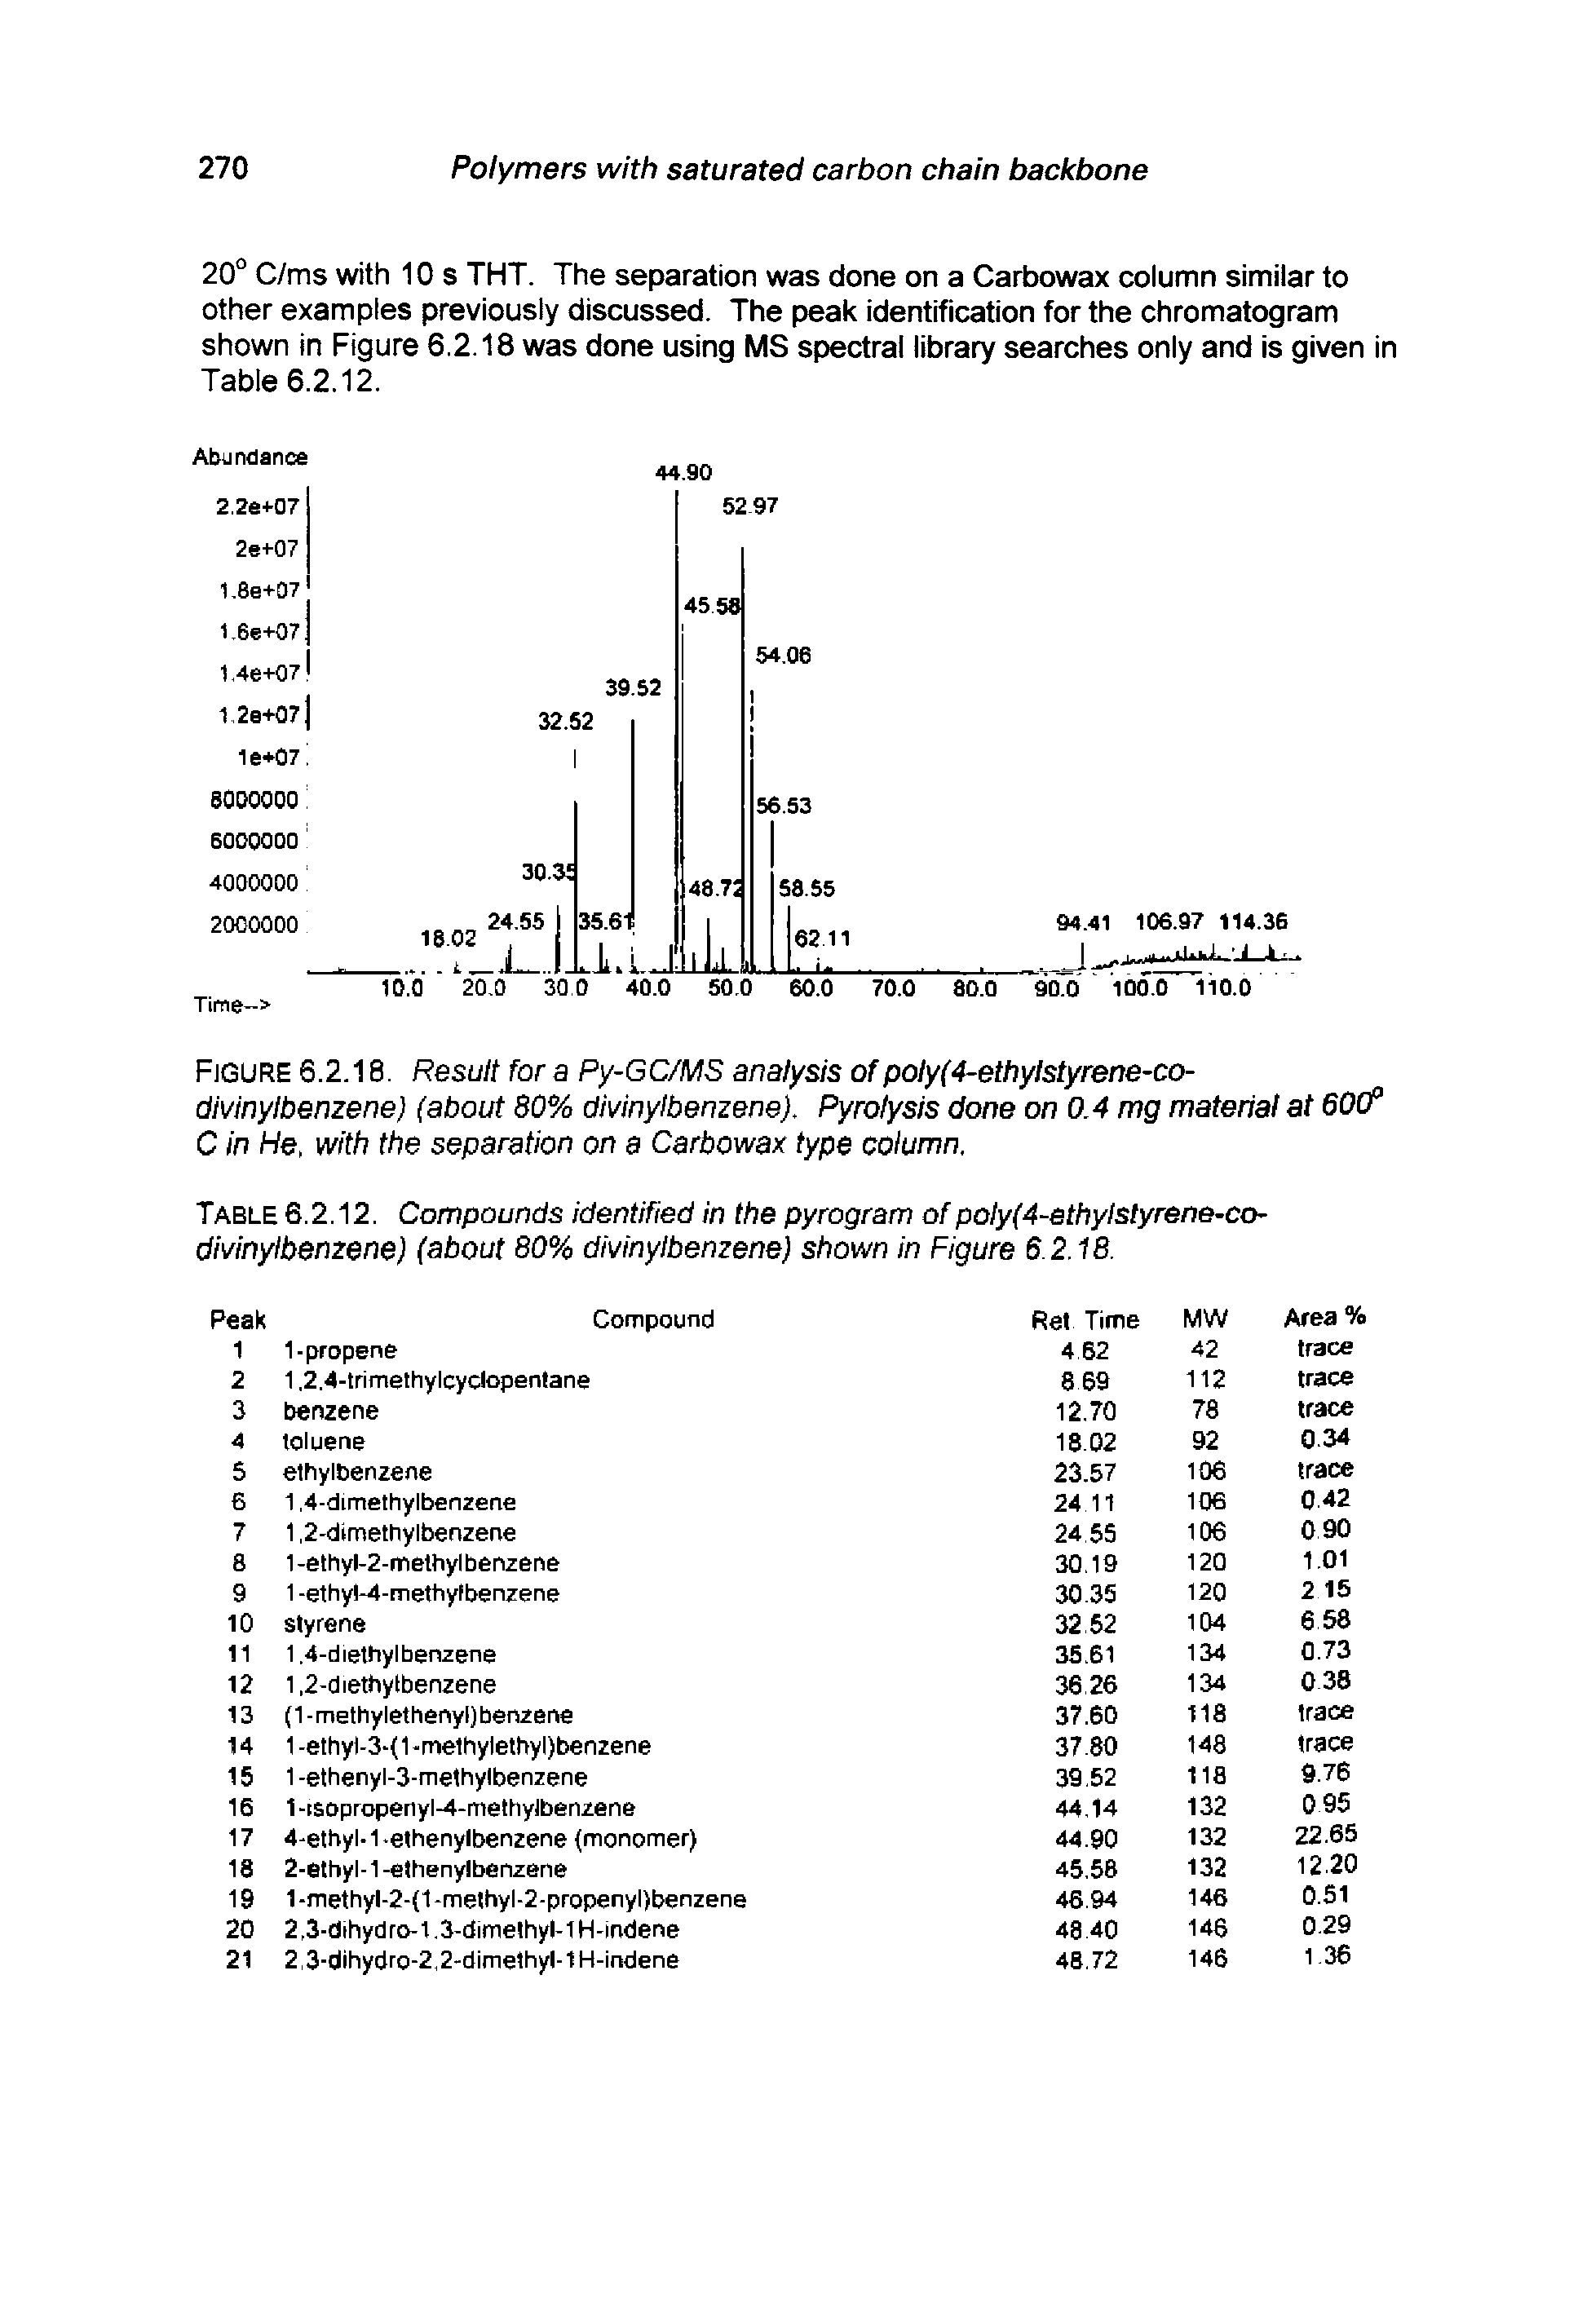 Table 6.2.12. Compounds identified in the pyrogram of poly(4-ethylstyrene-co divinylbenzene) (about 80% divinylbenzene) shown in Figure 6.2.18.